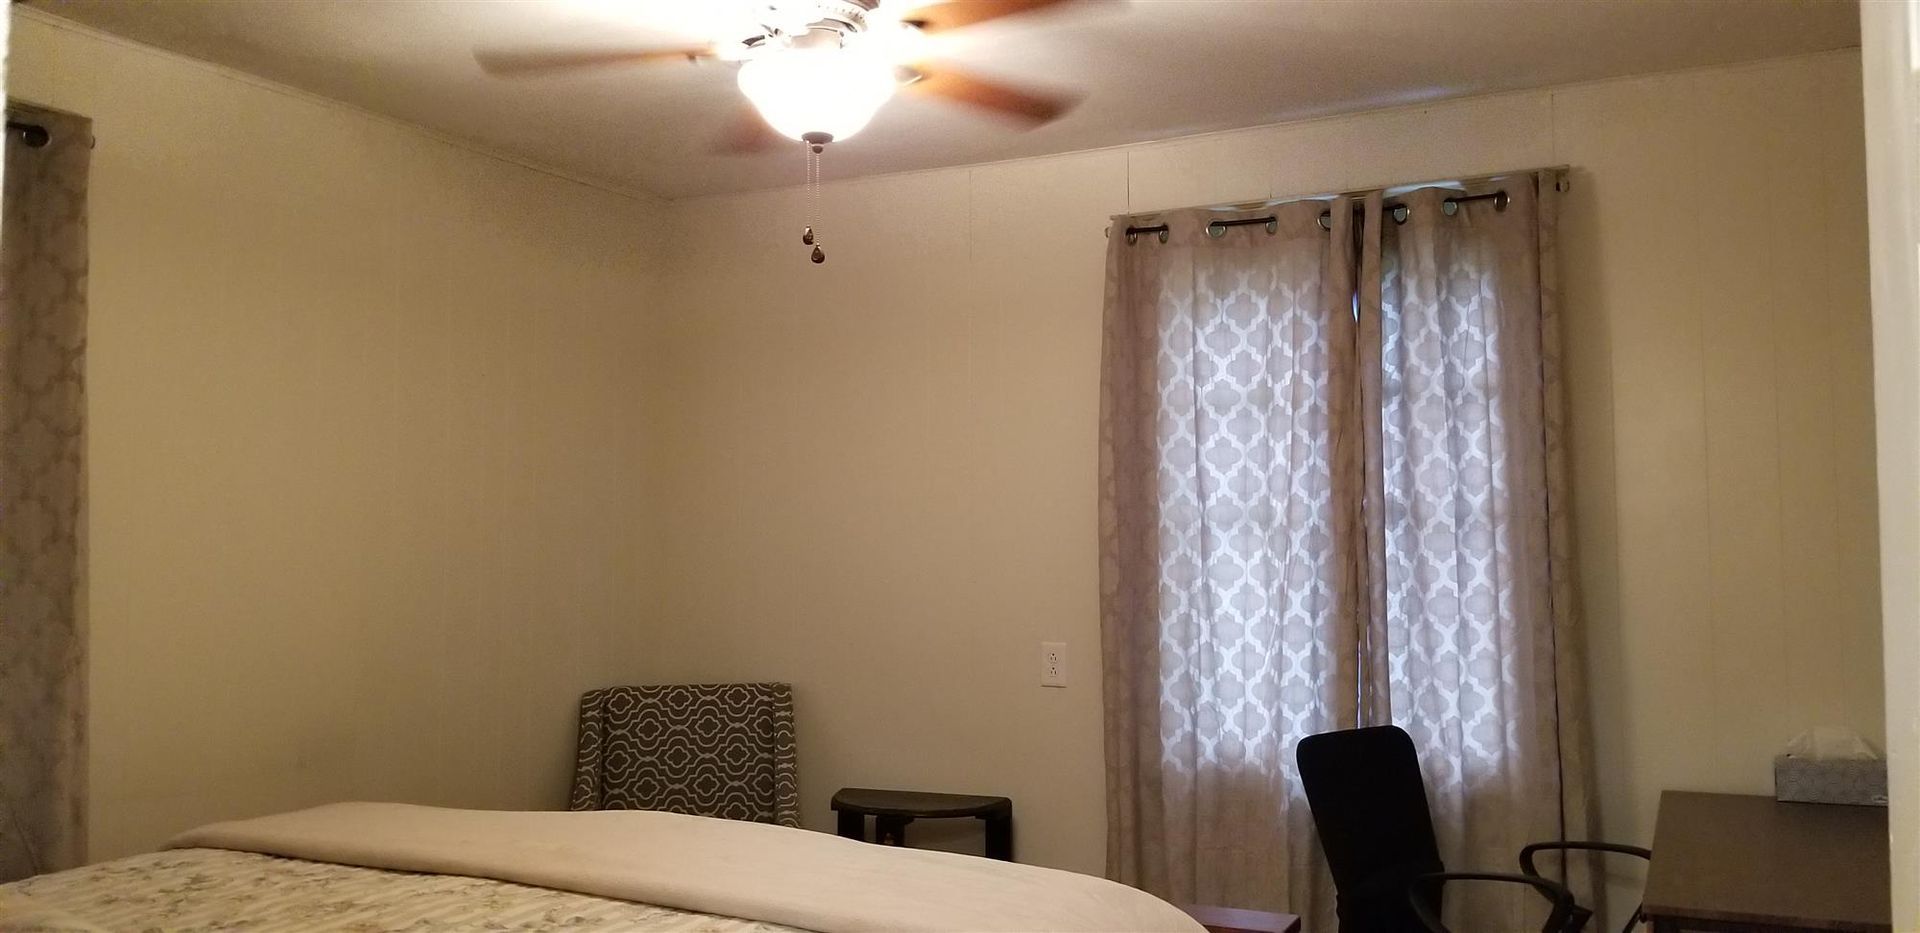 A bedroom with a bed , chair , and ceiling fan.